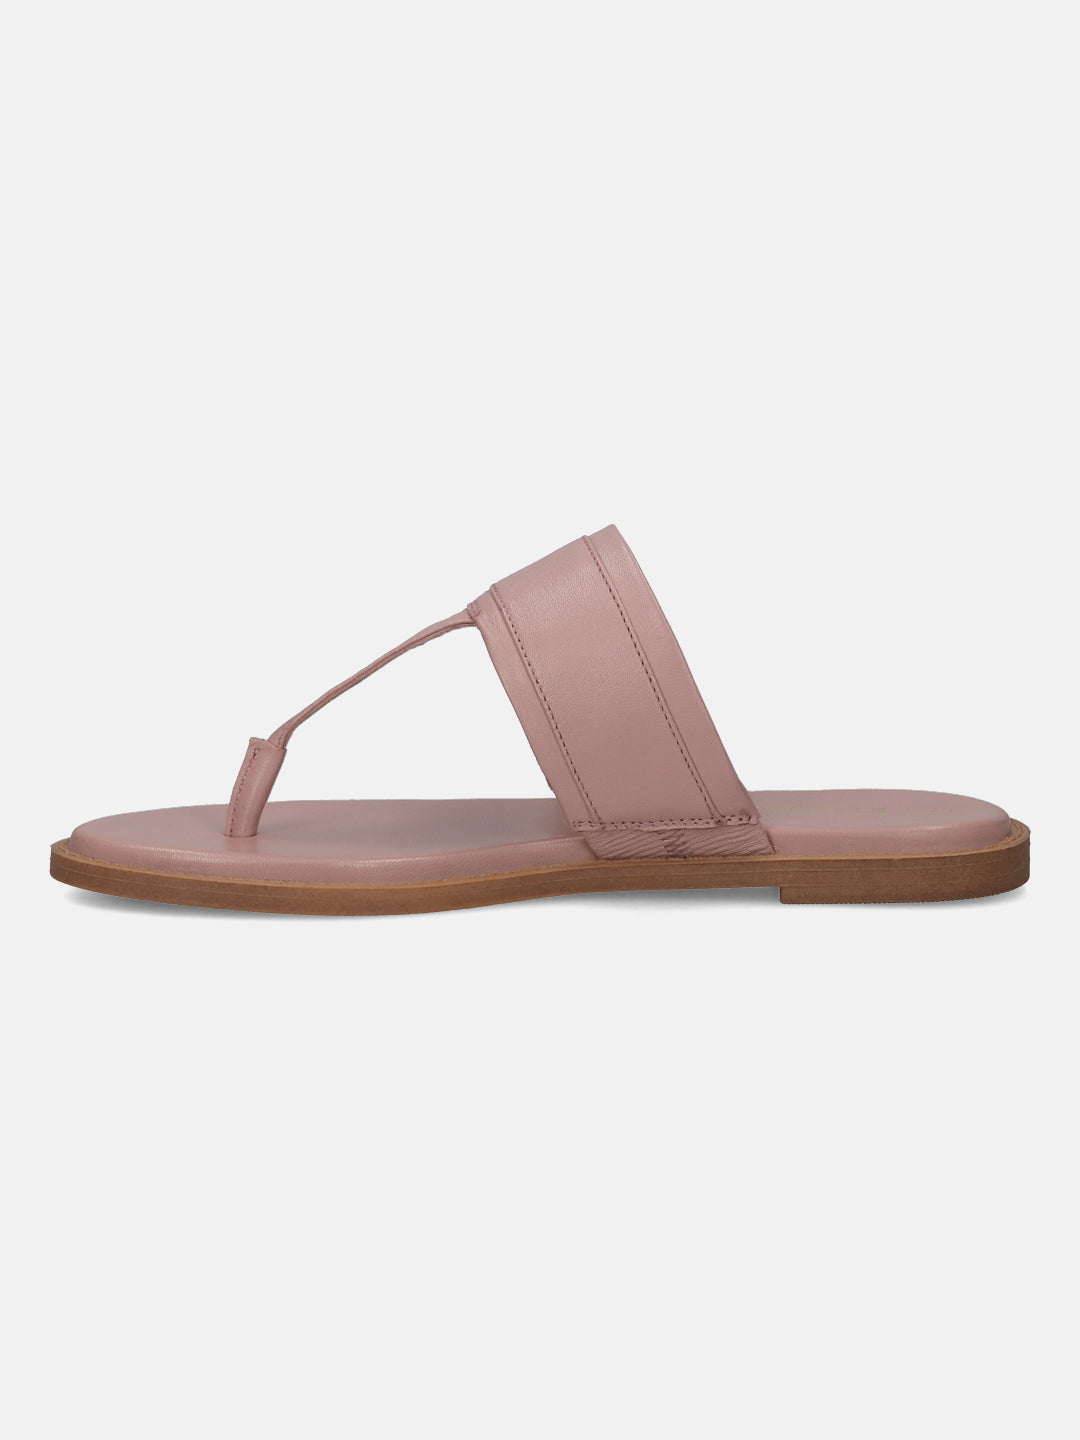 Goldy Rose Thongs Sandals